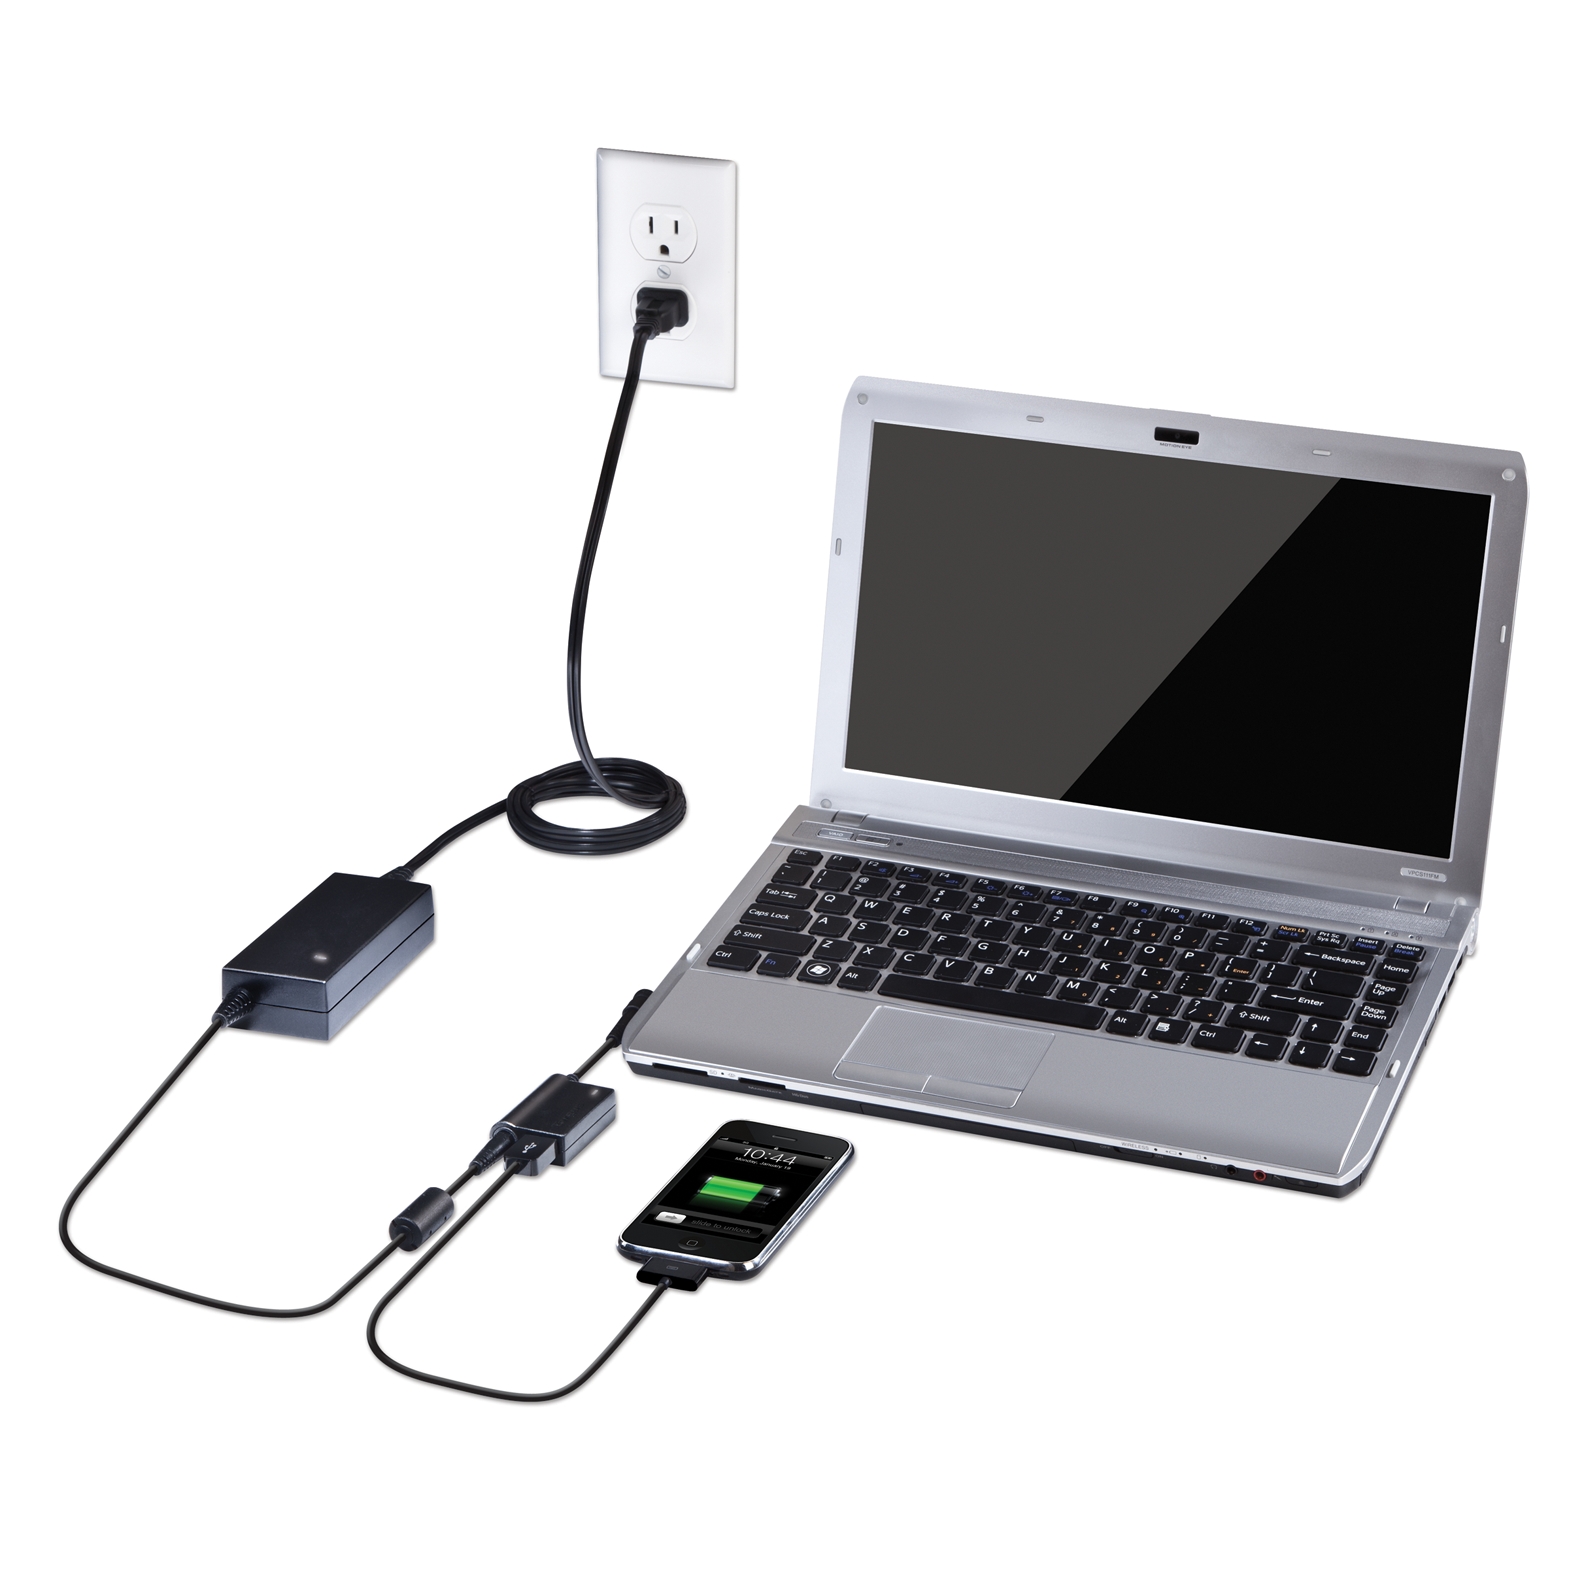 Charger Plugged In But Not Charging Solved Laptops  Review Ebooks